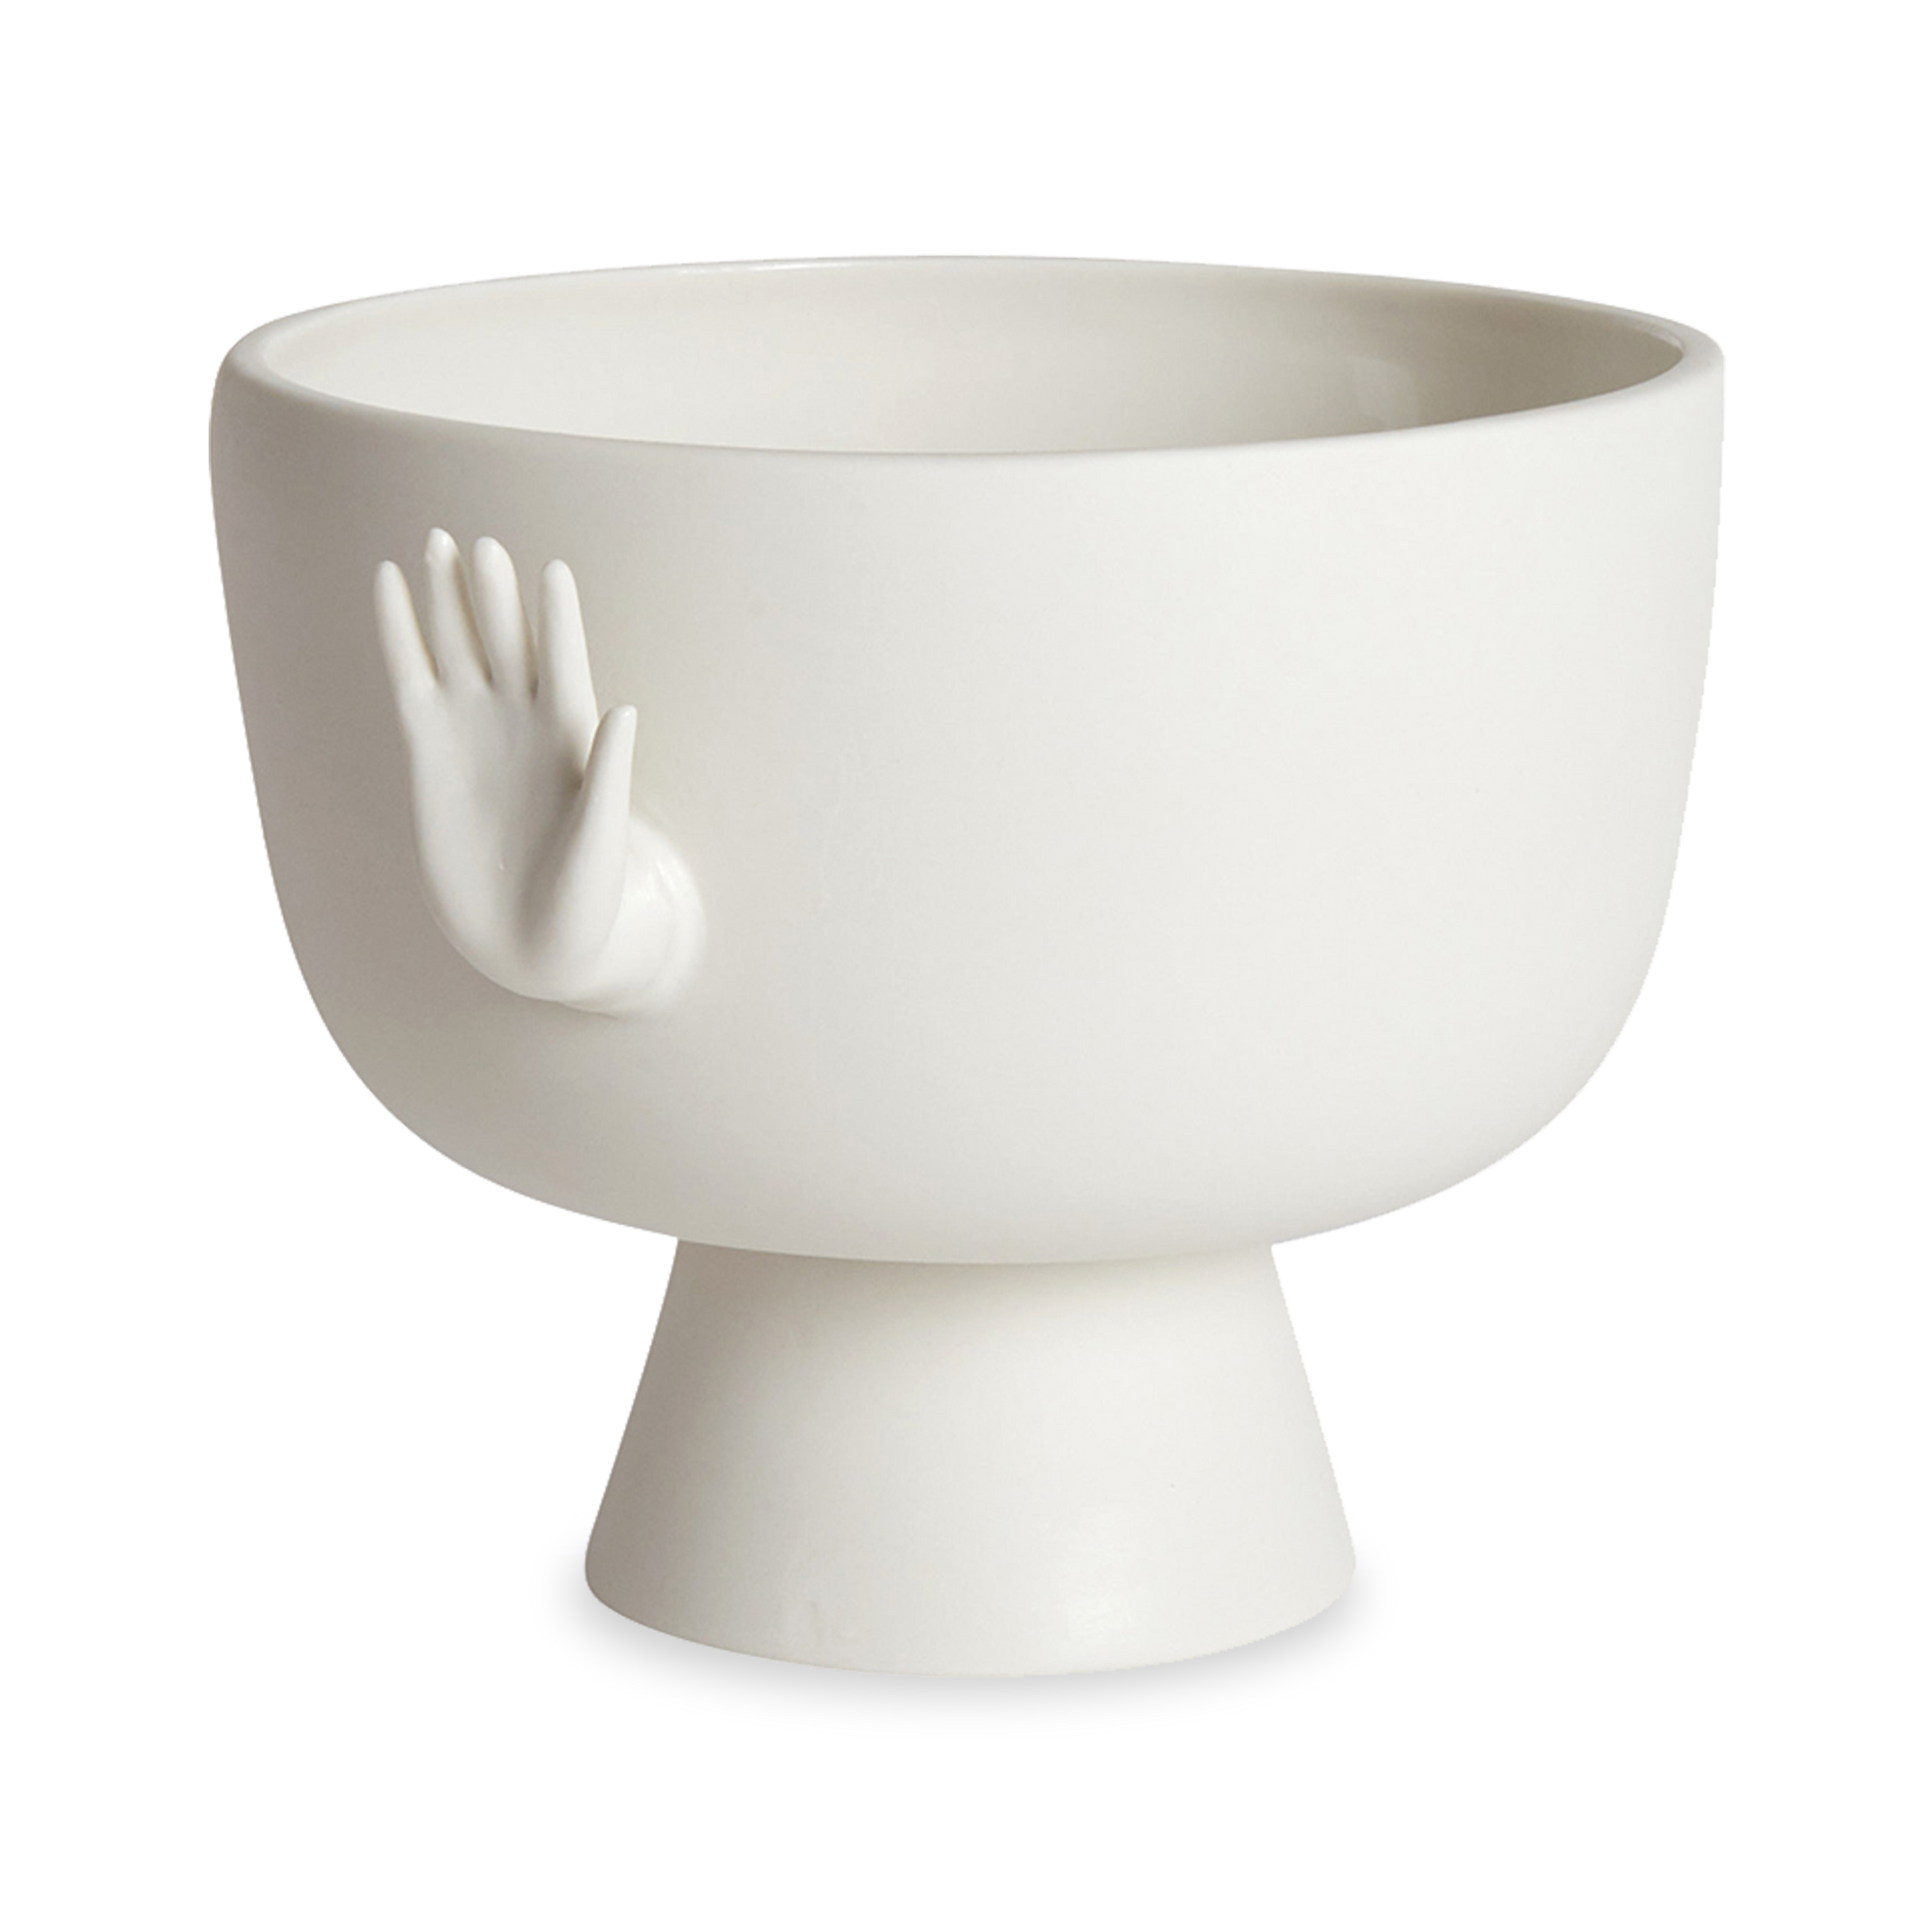 The Eve Pedestal Bowl pairs a shapely silhouette with sly and seductive handles for surreal style.